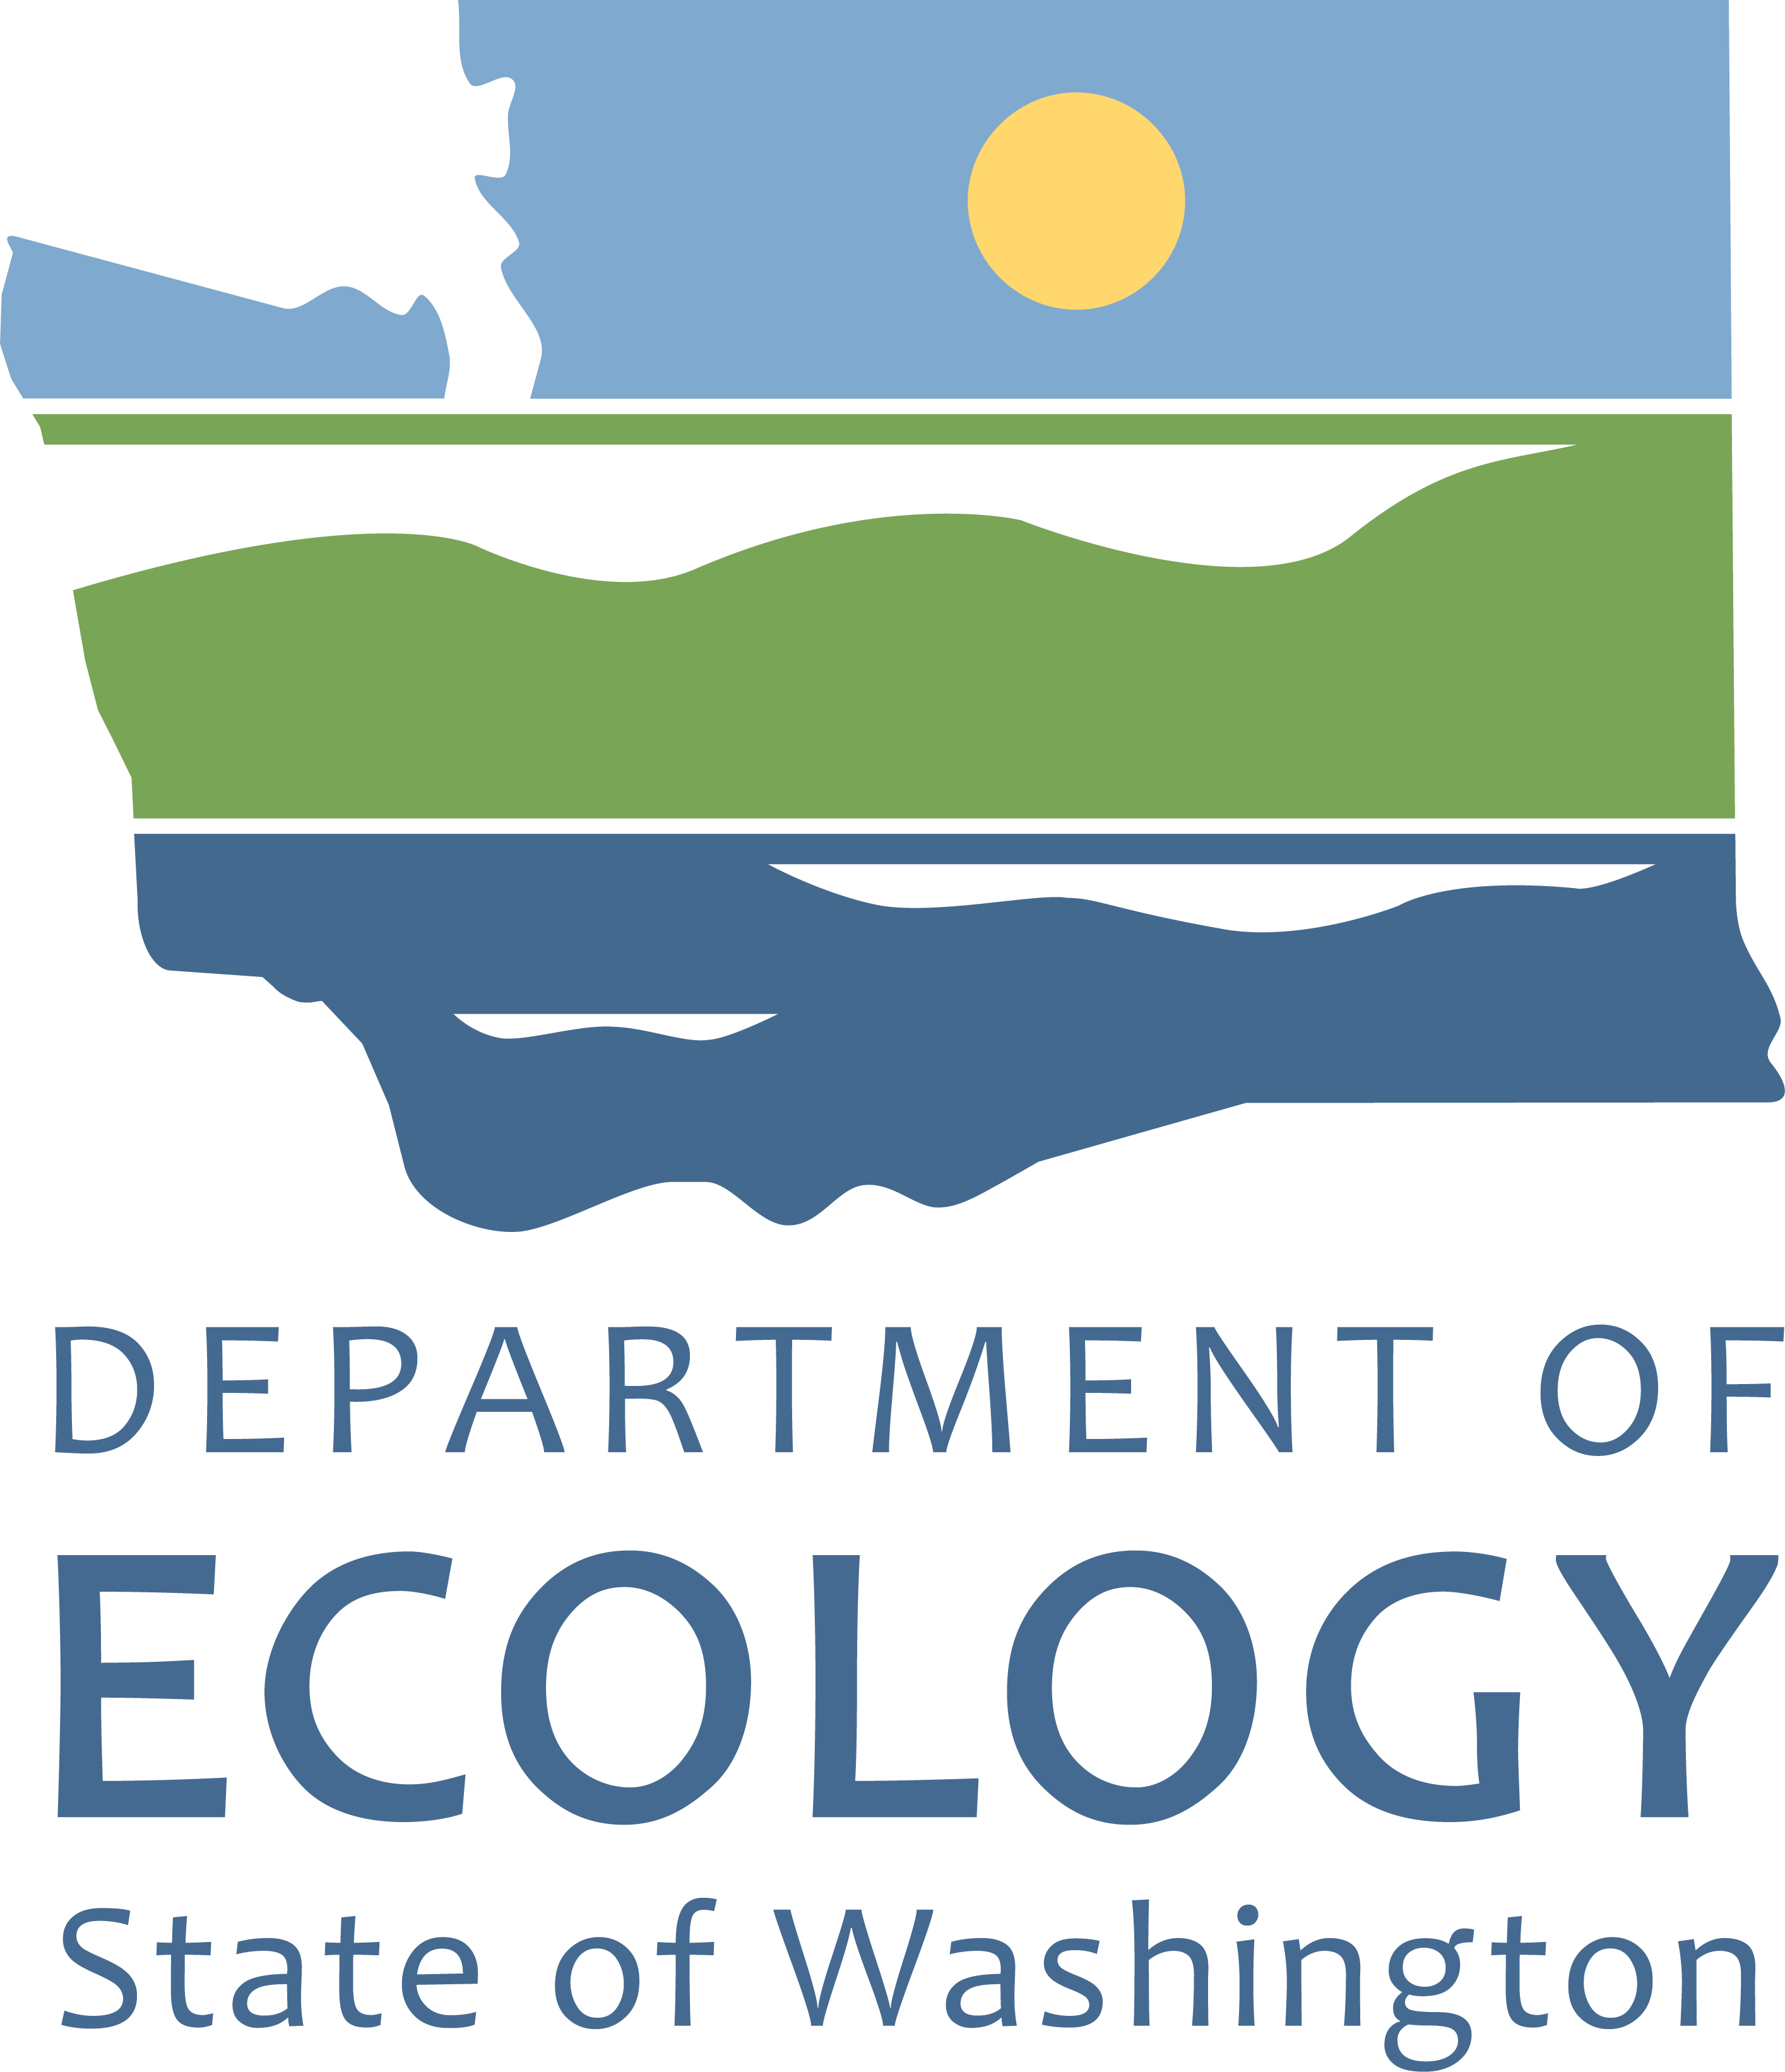 Washington state department of Ecology logo, showing land, water, and air